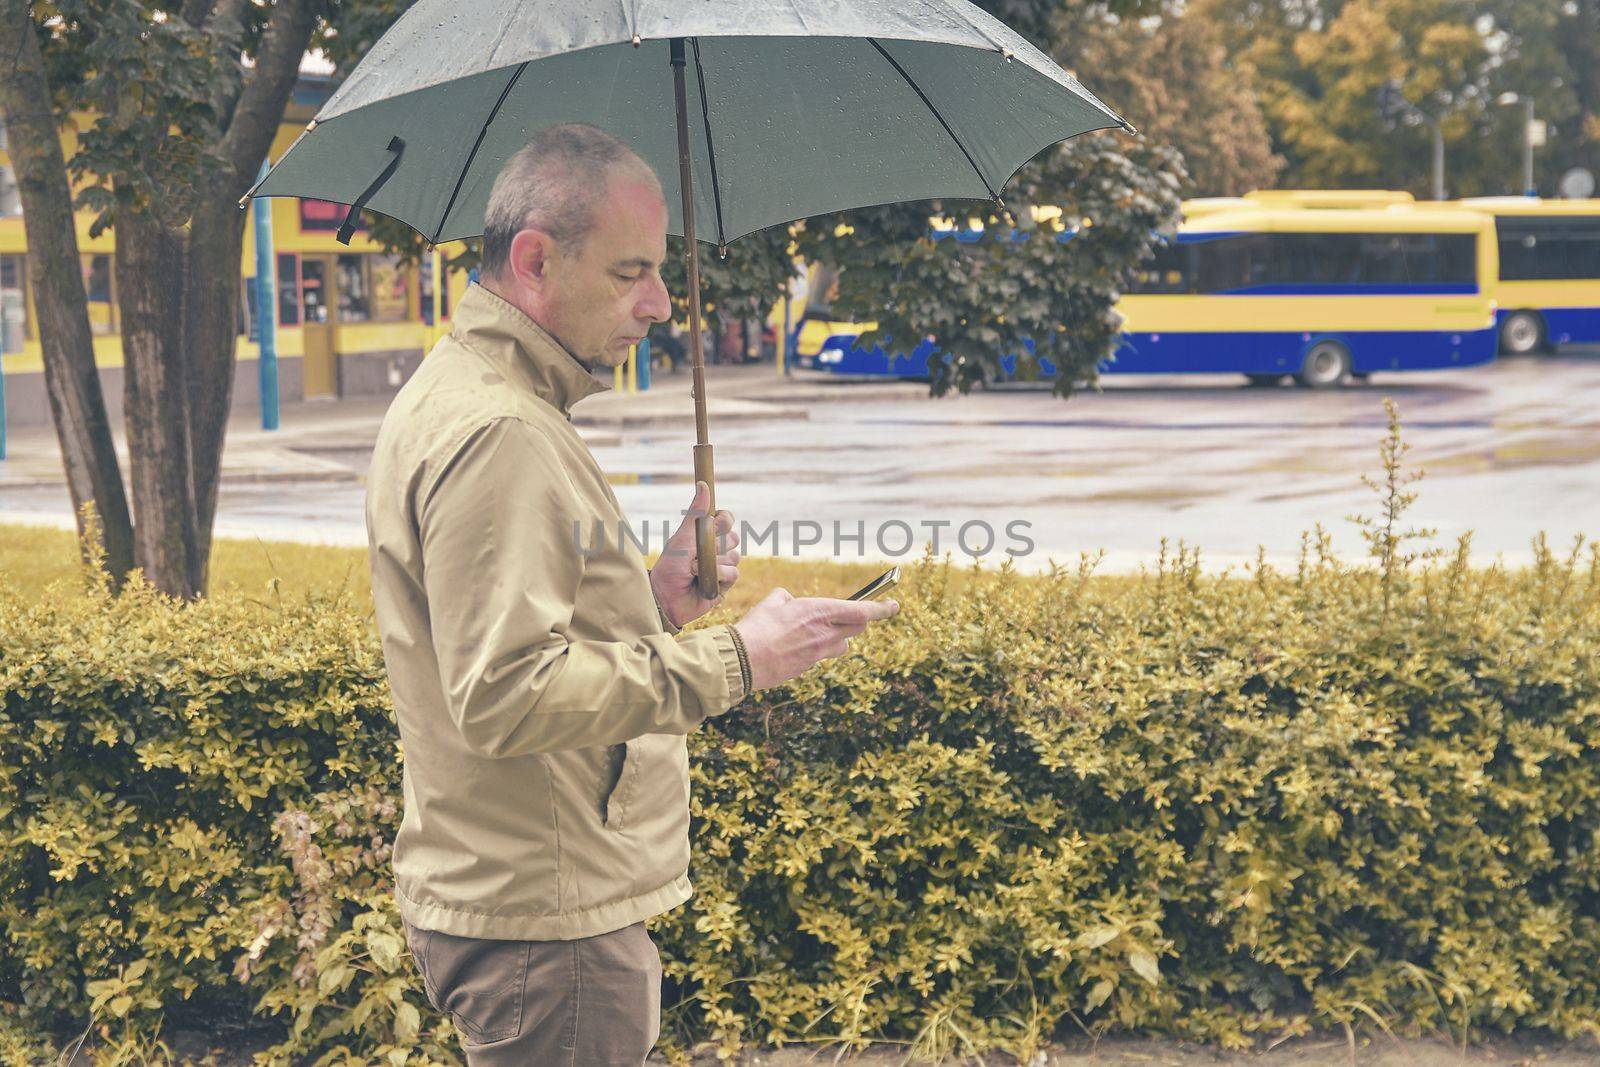 A man standing at the bus station with an umbrella waiting for a bus. Man waiting on a bus, texting on mobile phone in a rainy day. Rainy day in a local town.